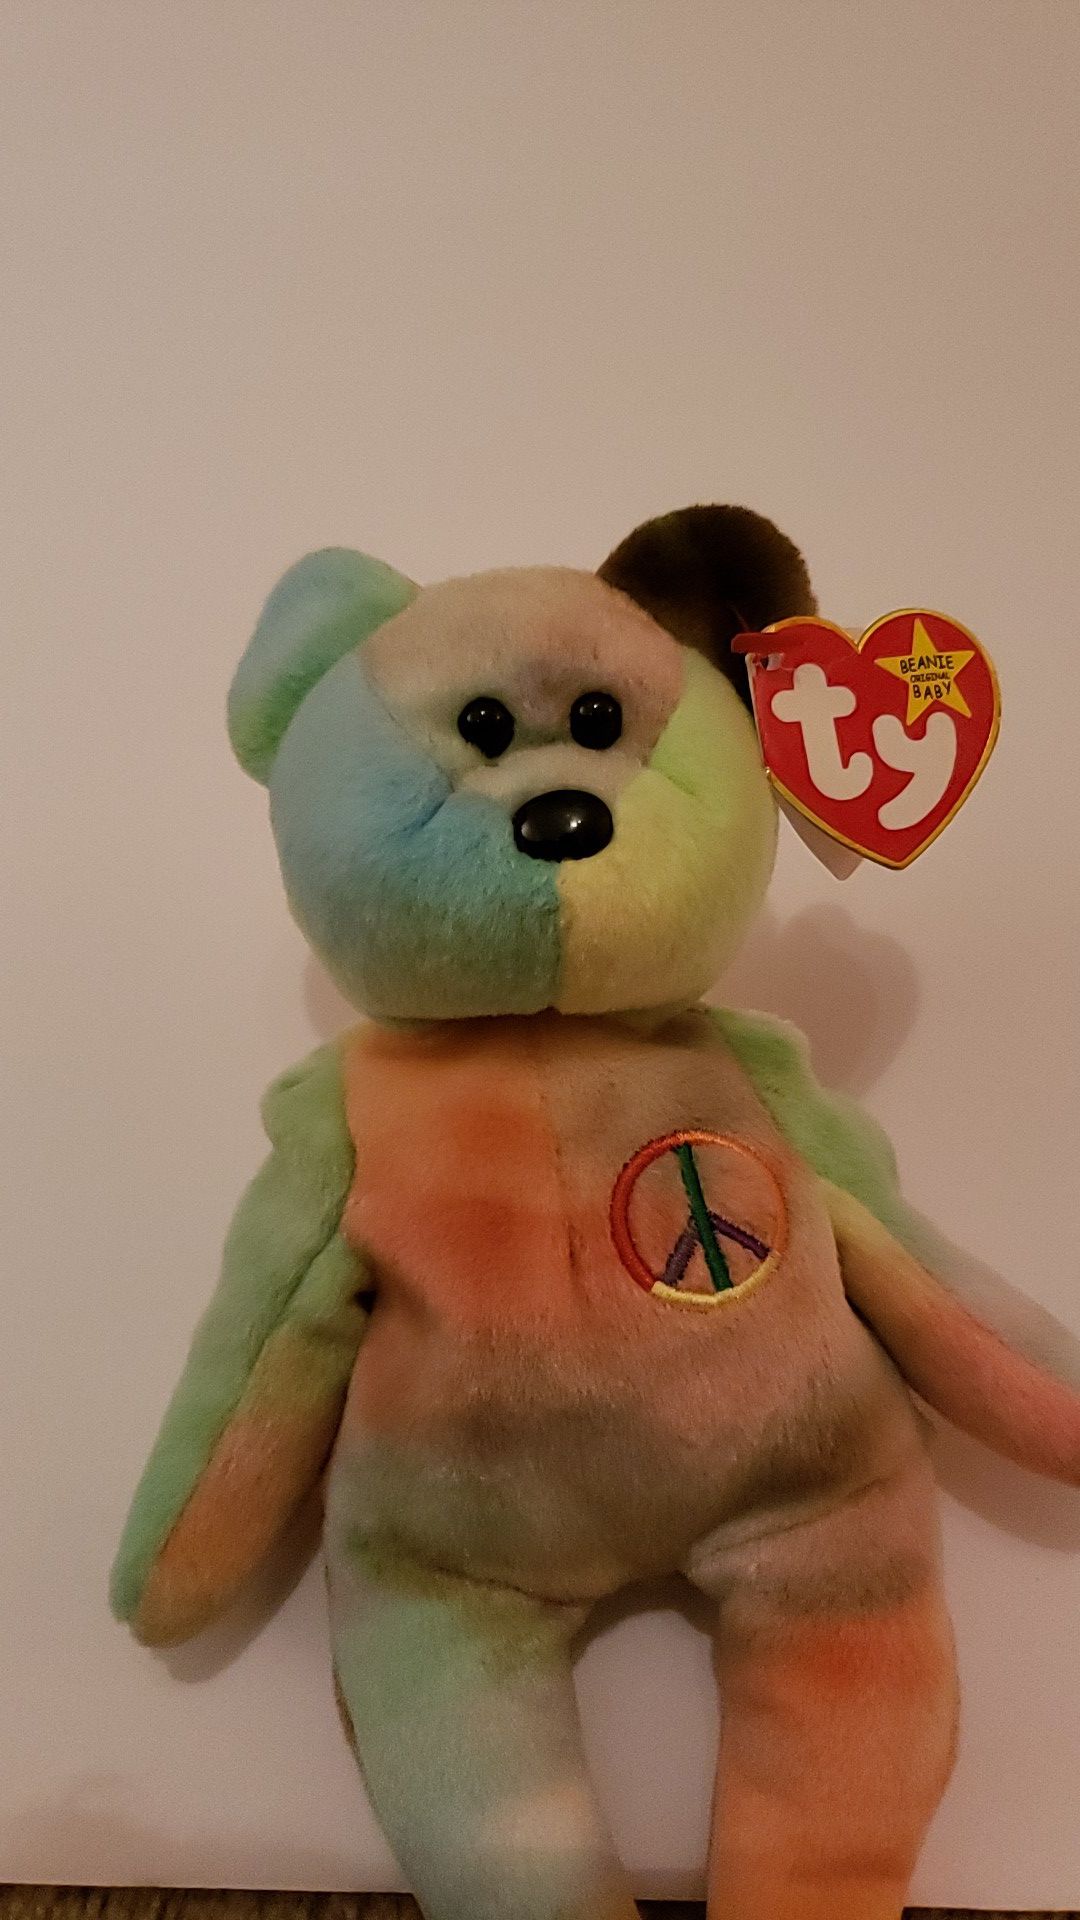 Rare beanie baby errors (original) tags are great